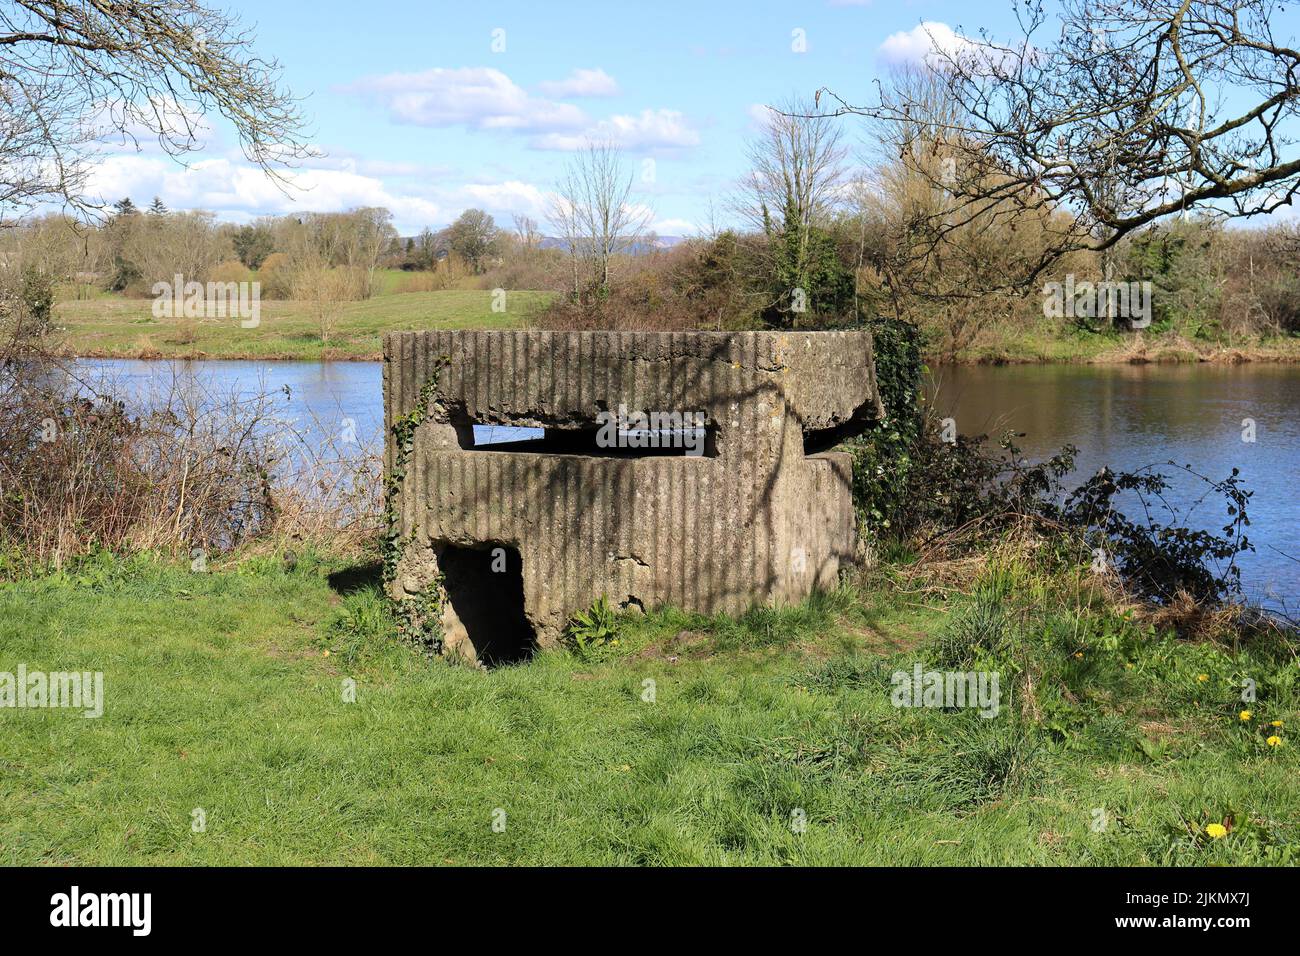 A Block House World War II bunker in Ireland, used to defend Ardnacrusha Power Station with water canal Stock Photo